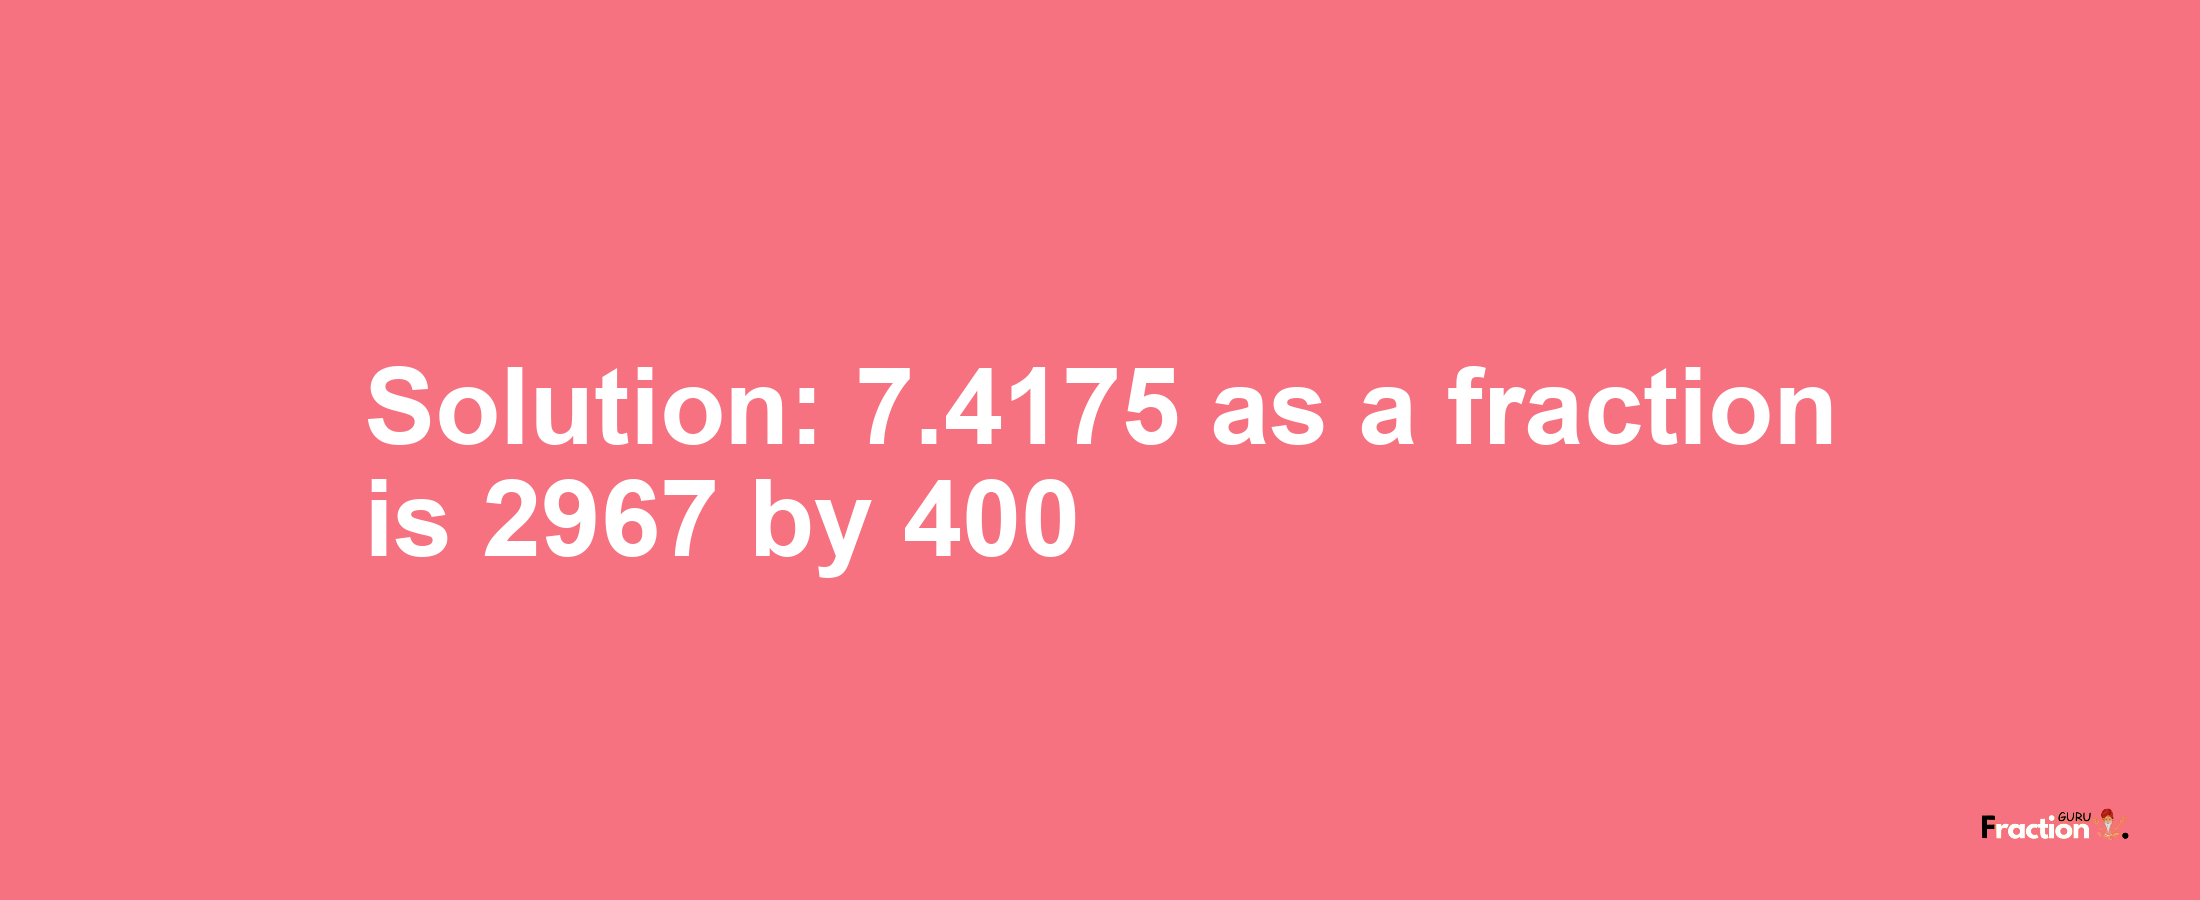 Solution:7.4175 as a fraction is 2967/400